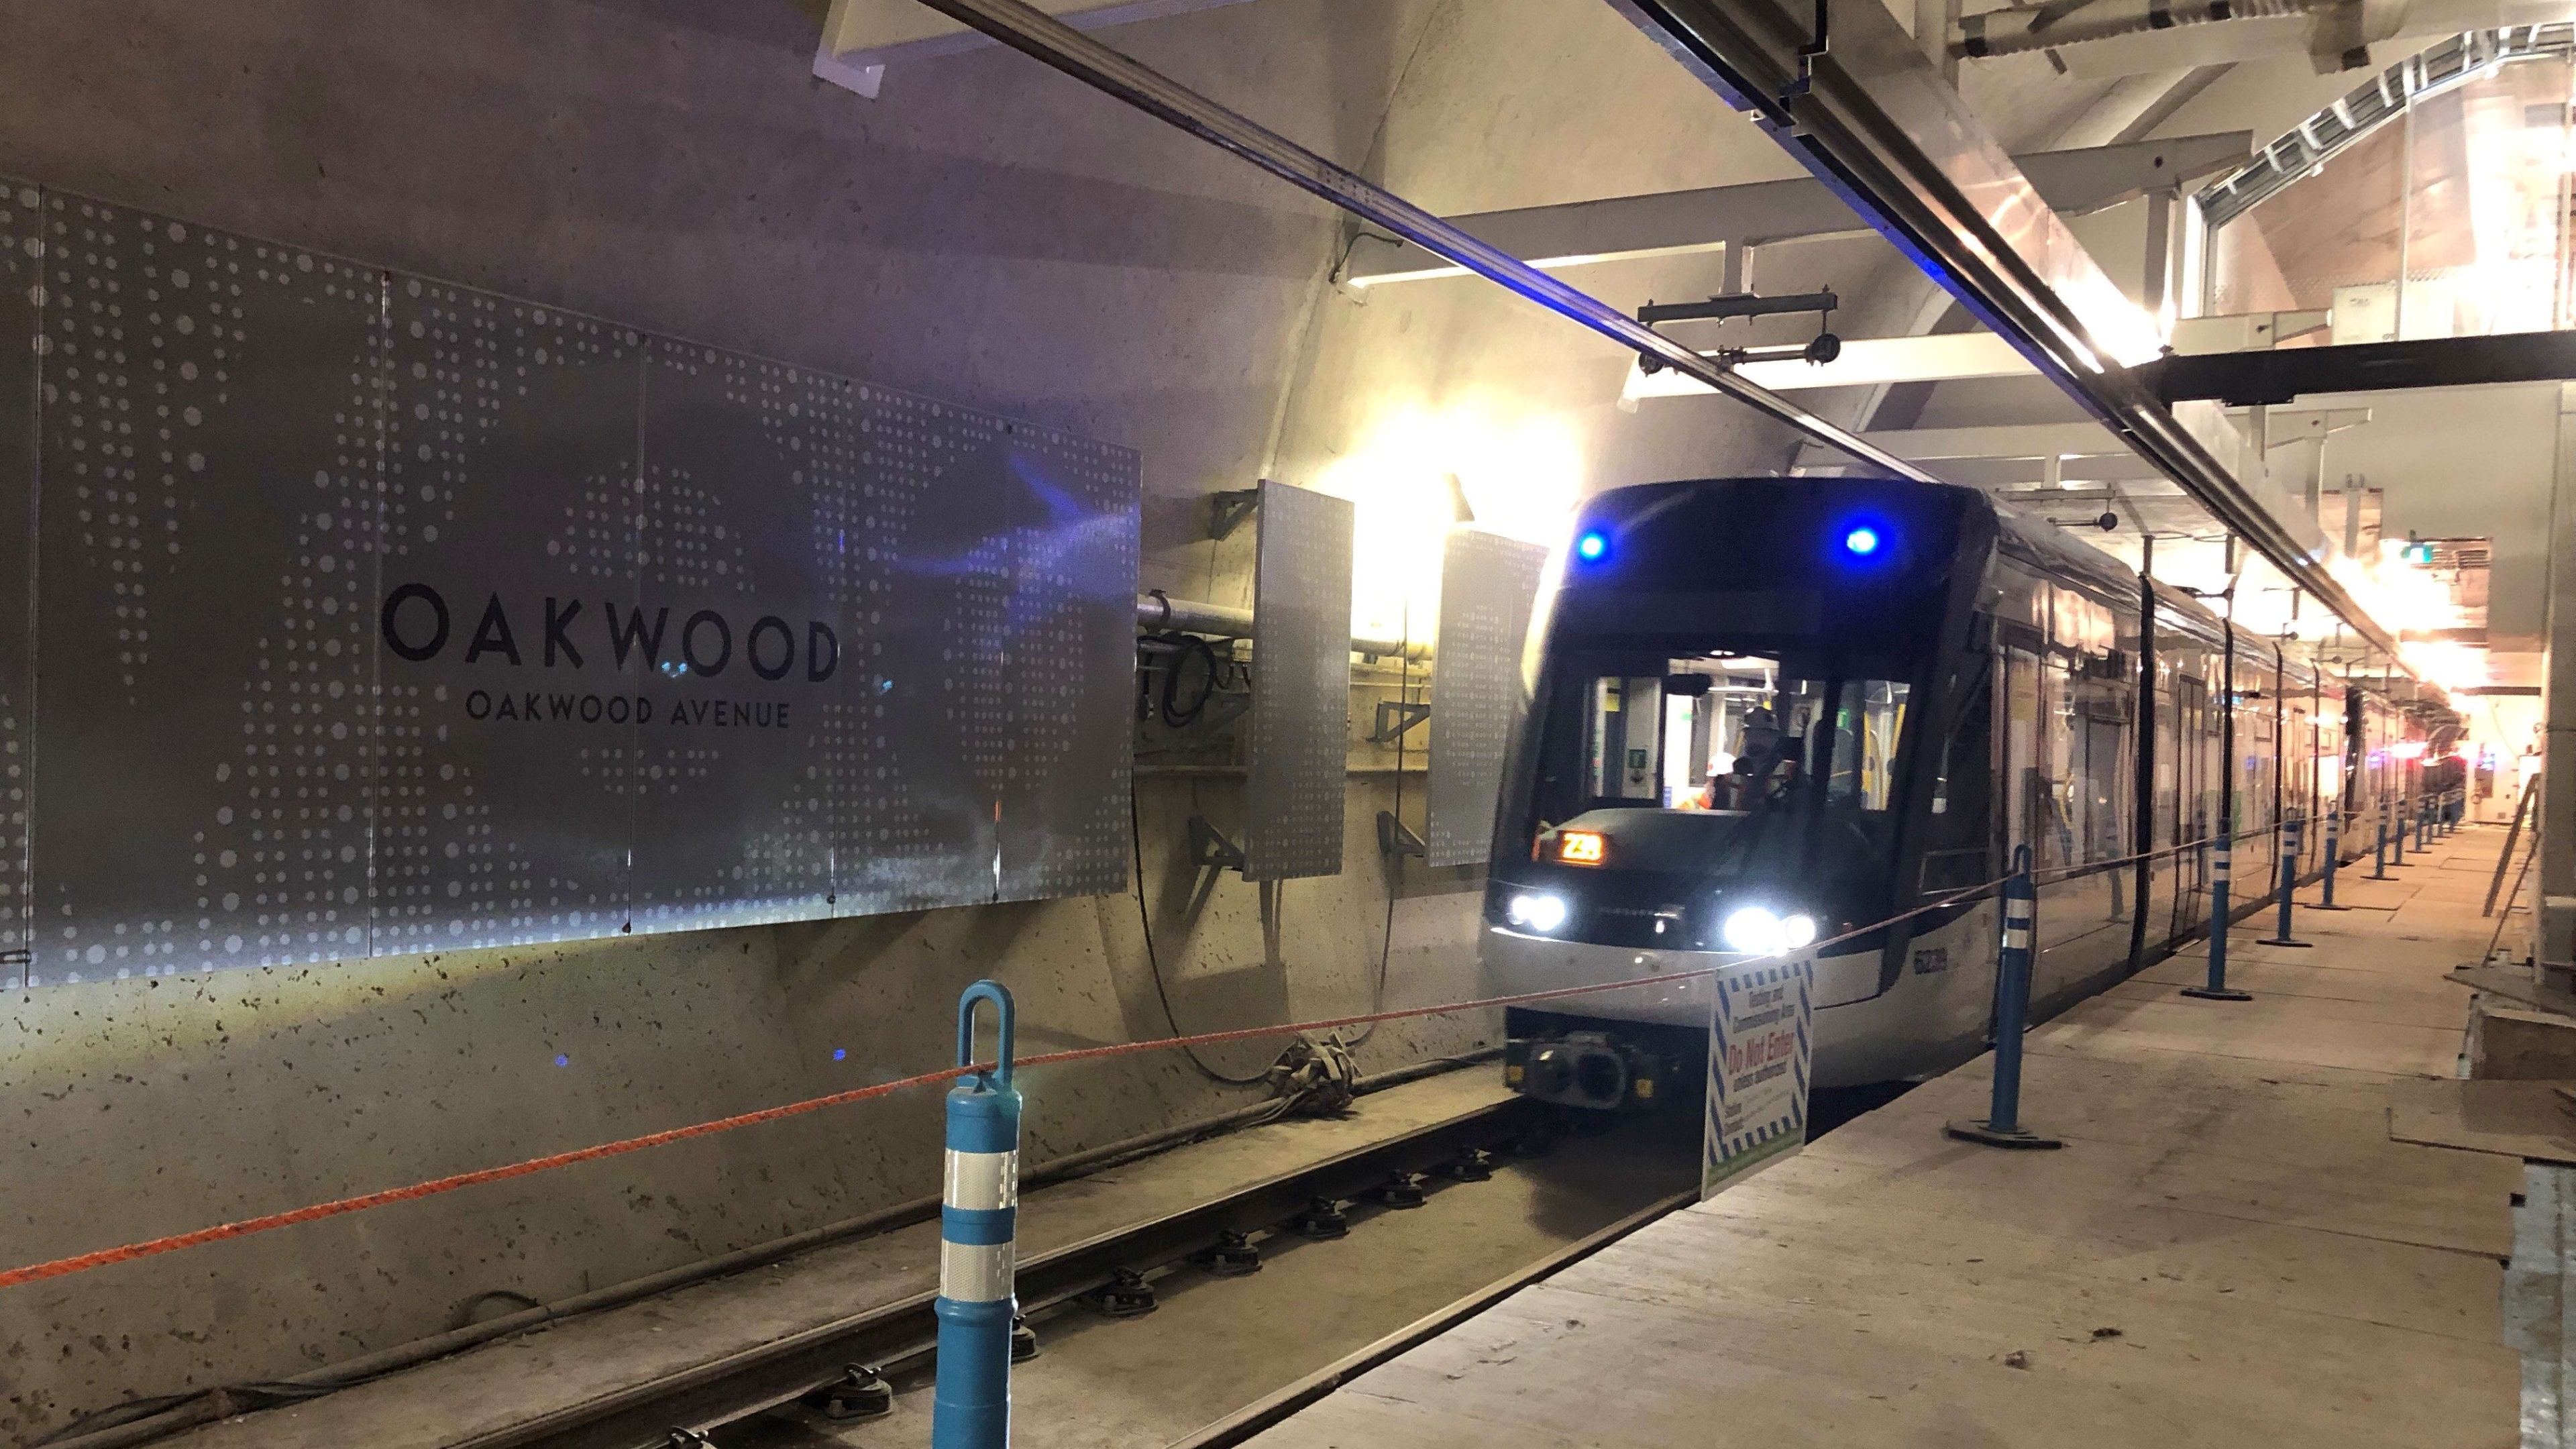 the train moving down the track, next to the Oakwood sign.